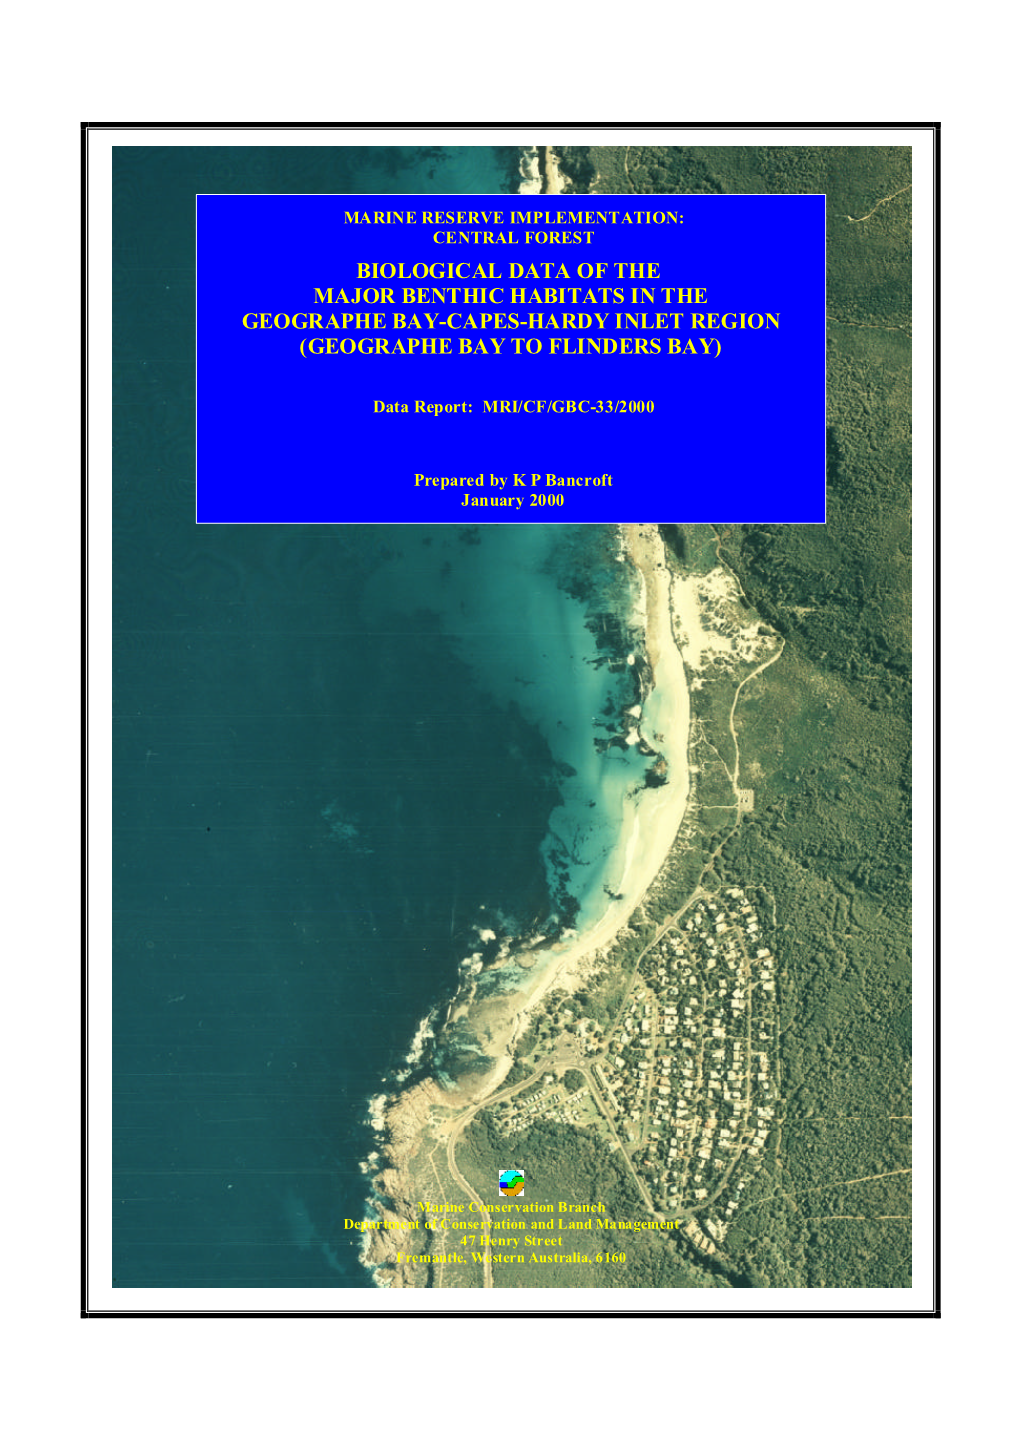 Biological Data of the Major Benthic Habitats in the Geographe Bay-Capes-Hardy Inlet Region (Geographe Bay to Flinders Bay)